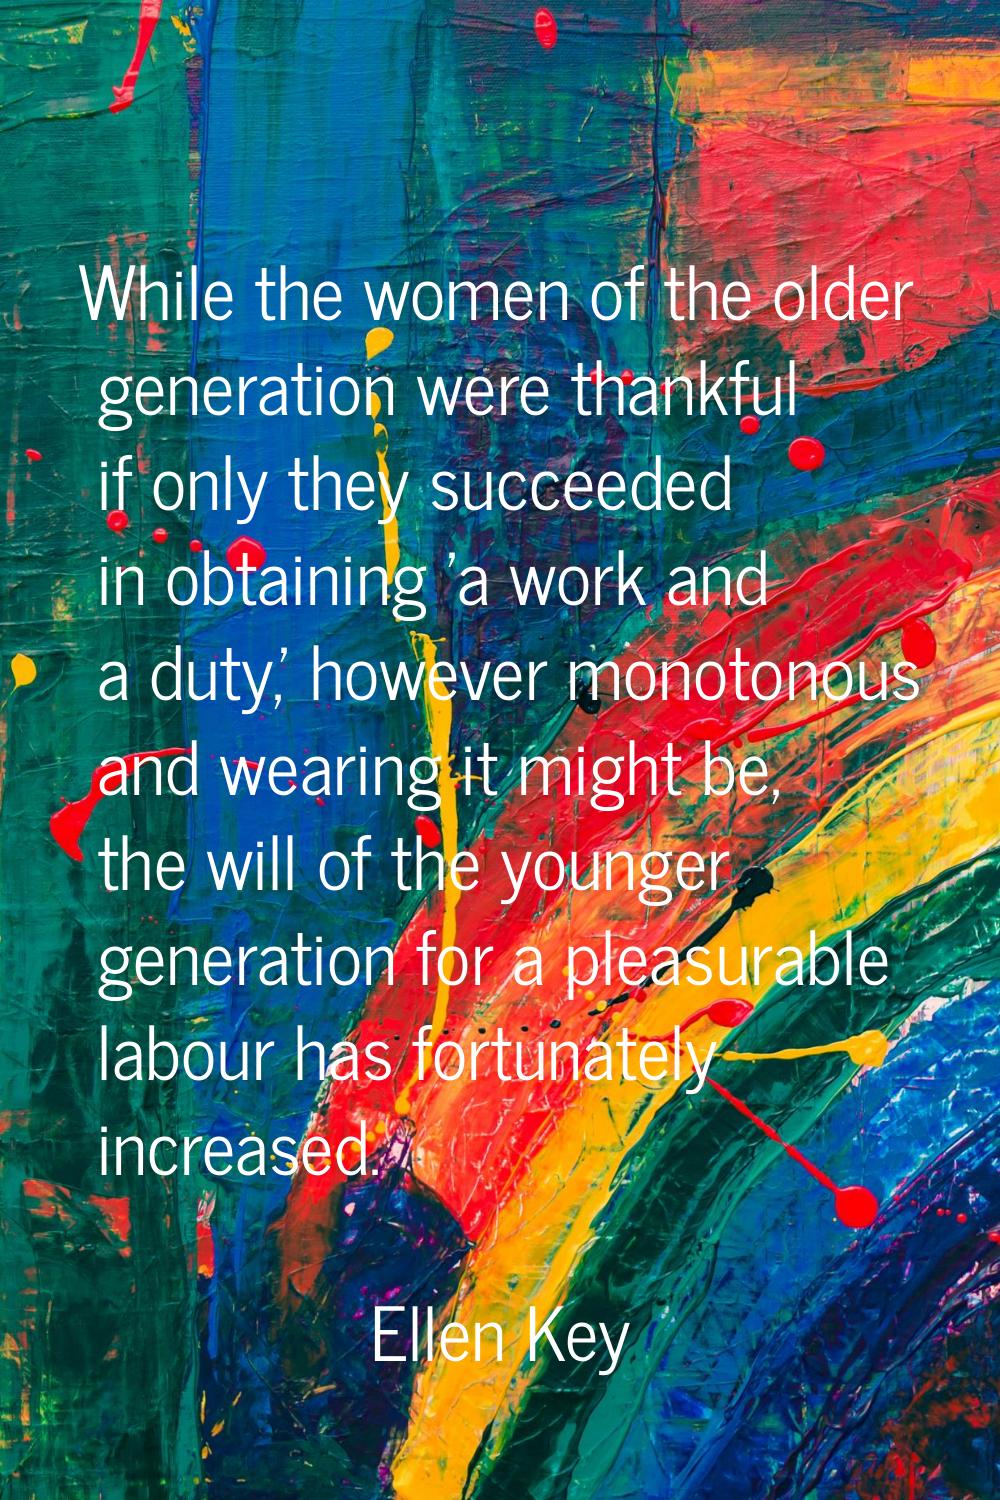 While the women of the older generation were thankful if only they succeeded in obtaining 'a work a